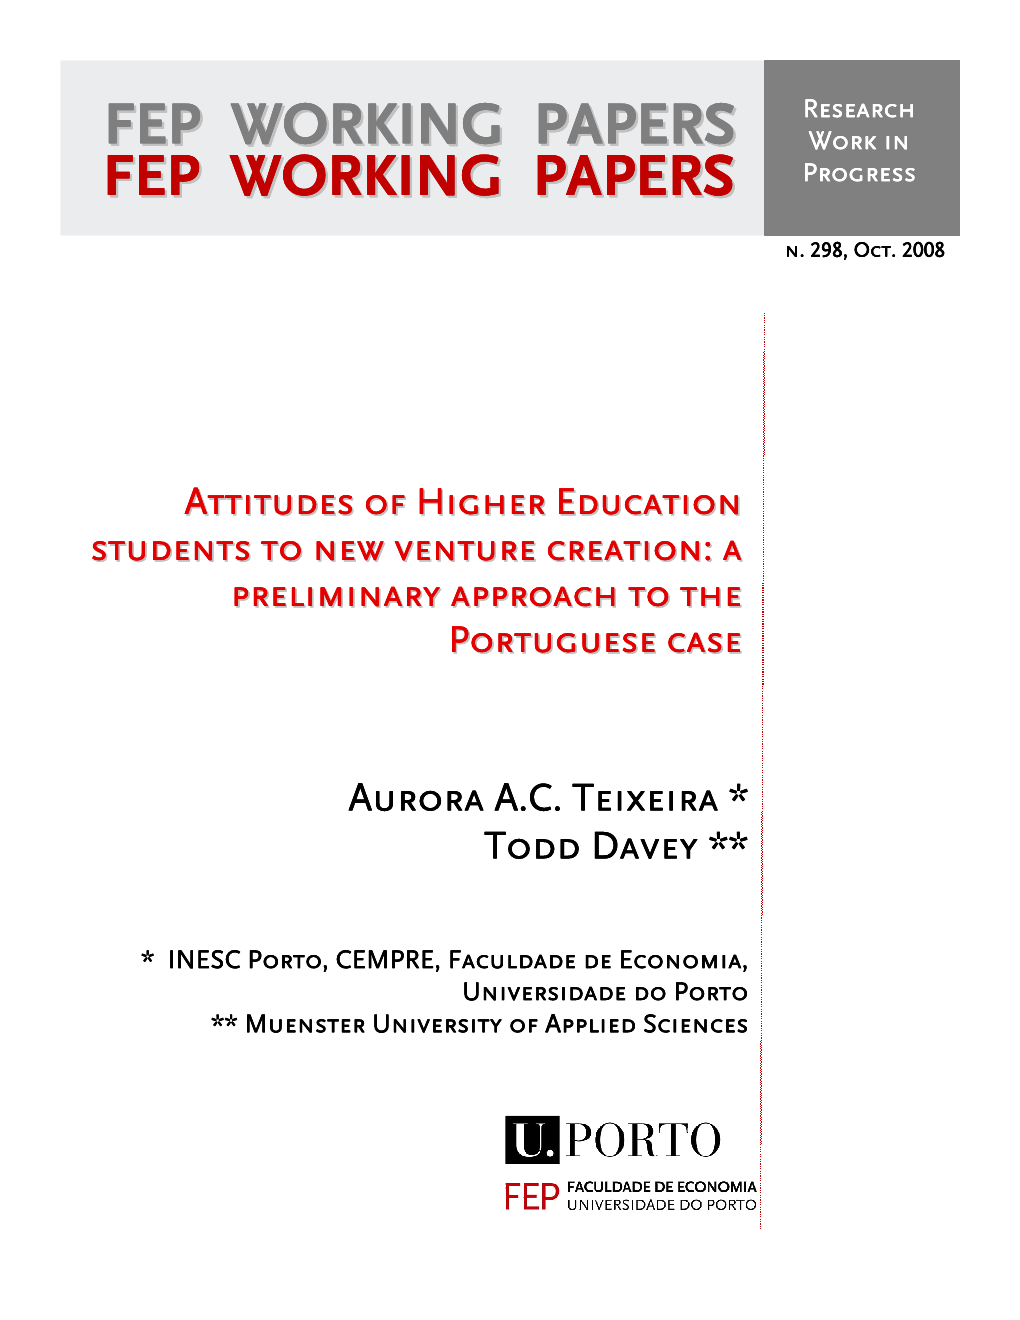 Recent FEP Working Papers